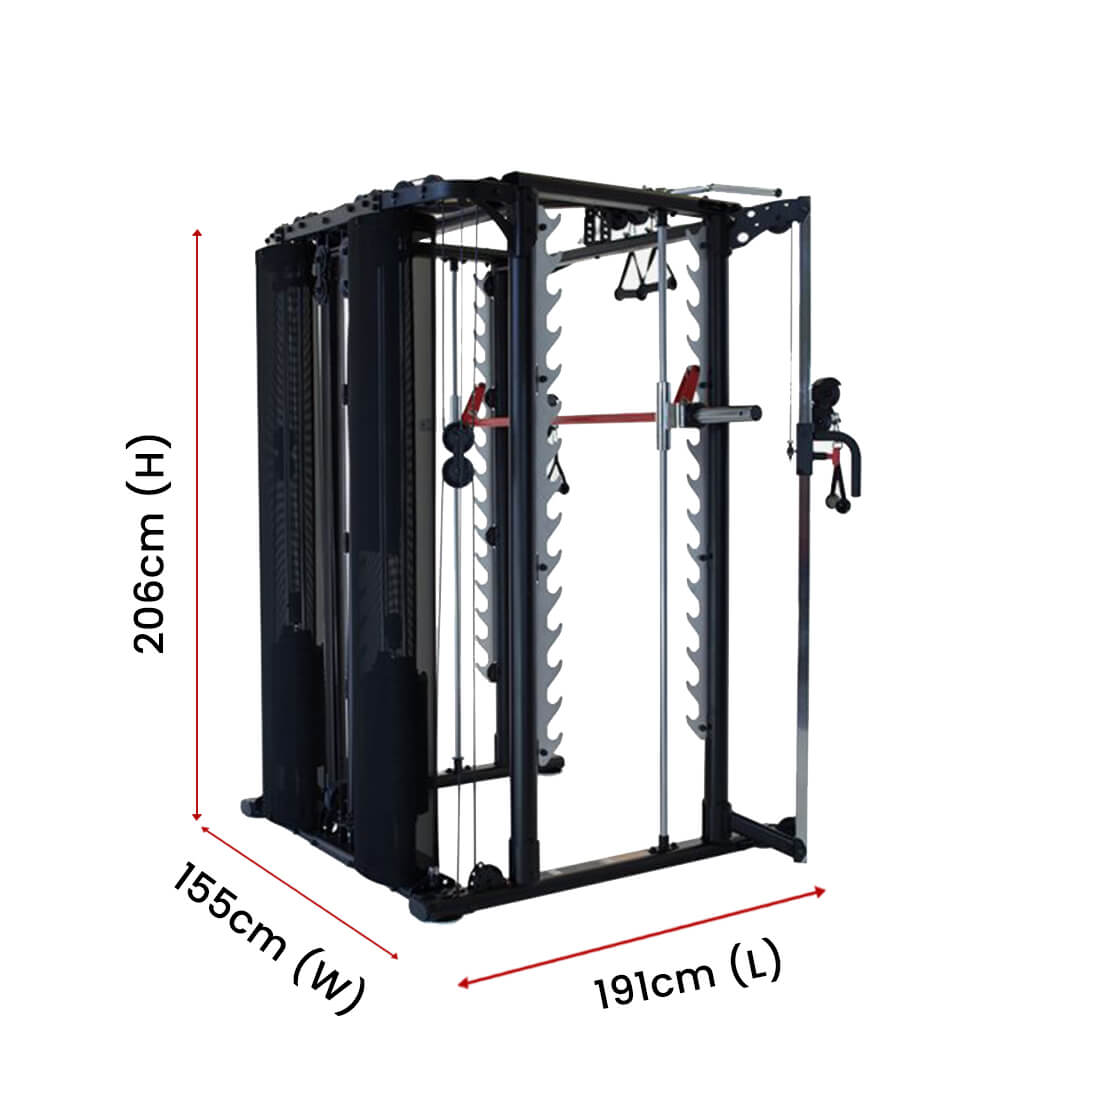 Inspire Fitness SCS Smith Cage System